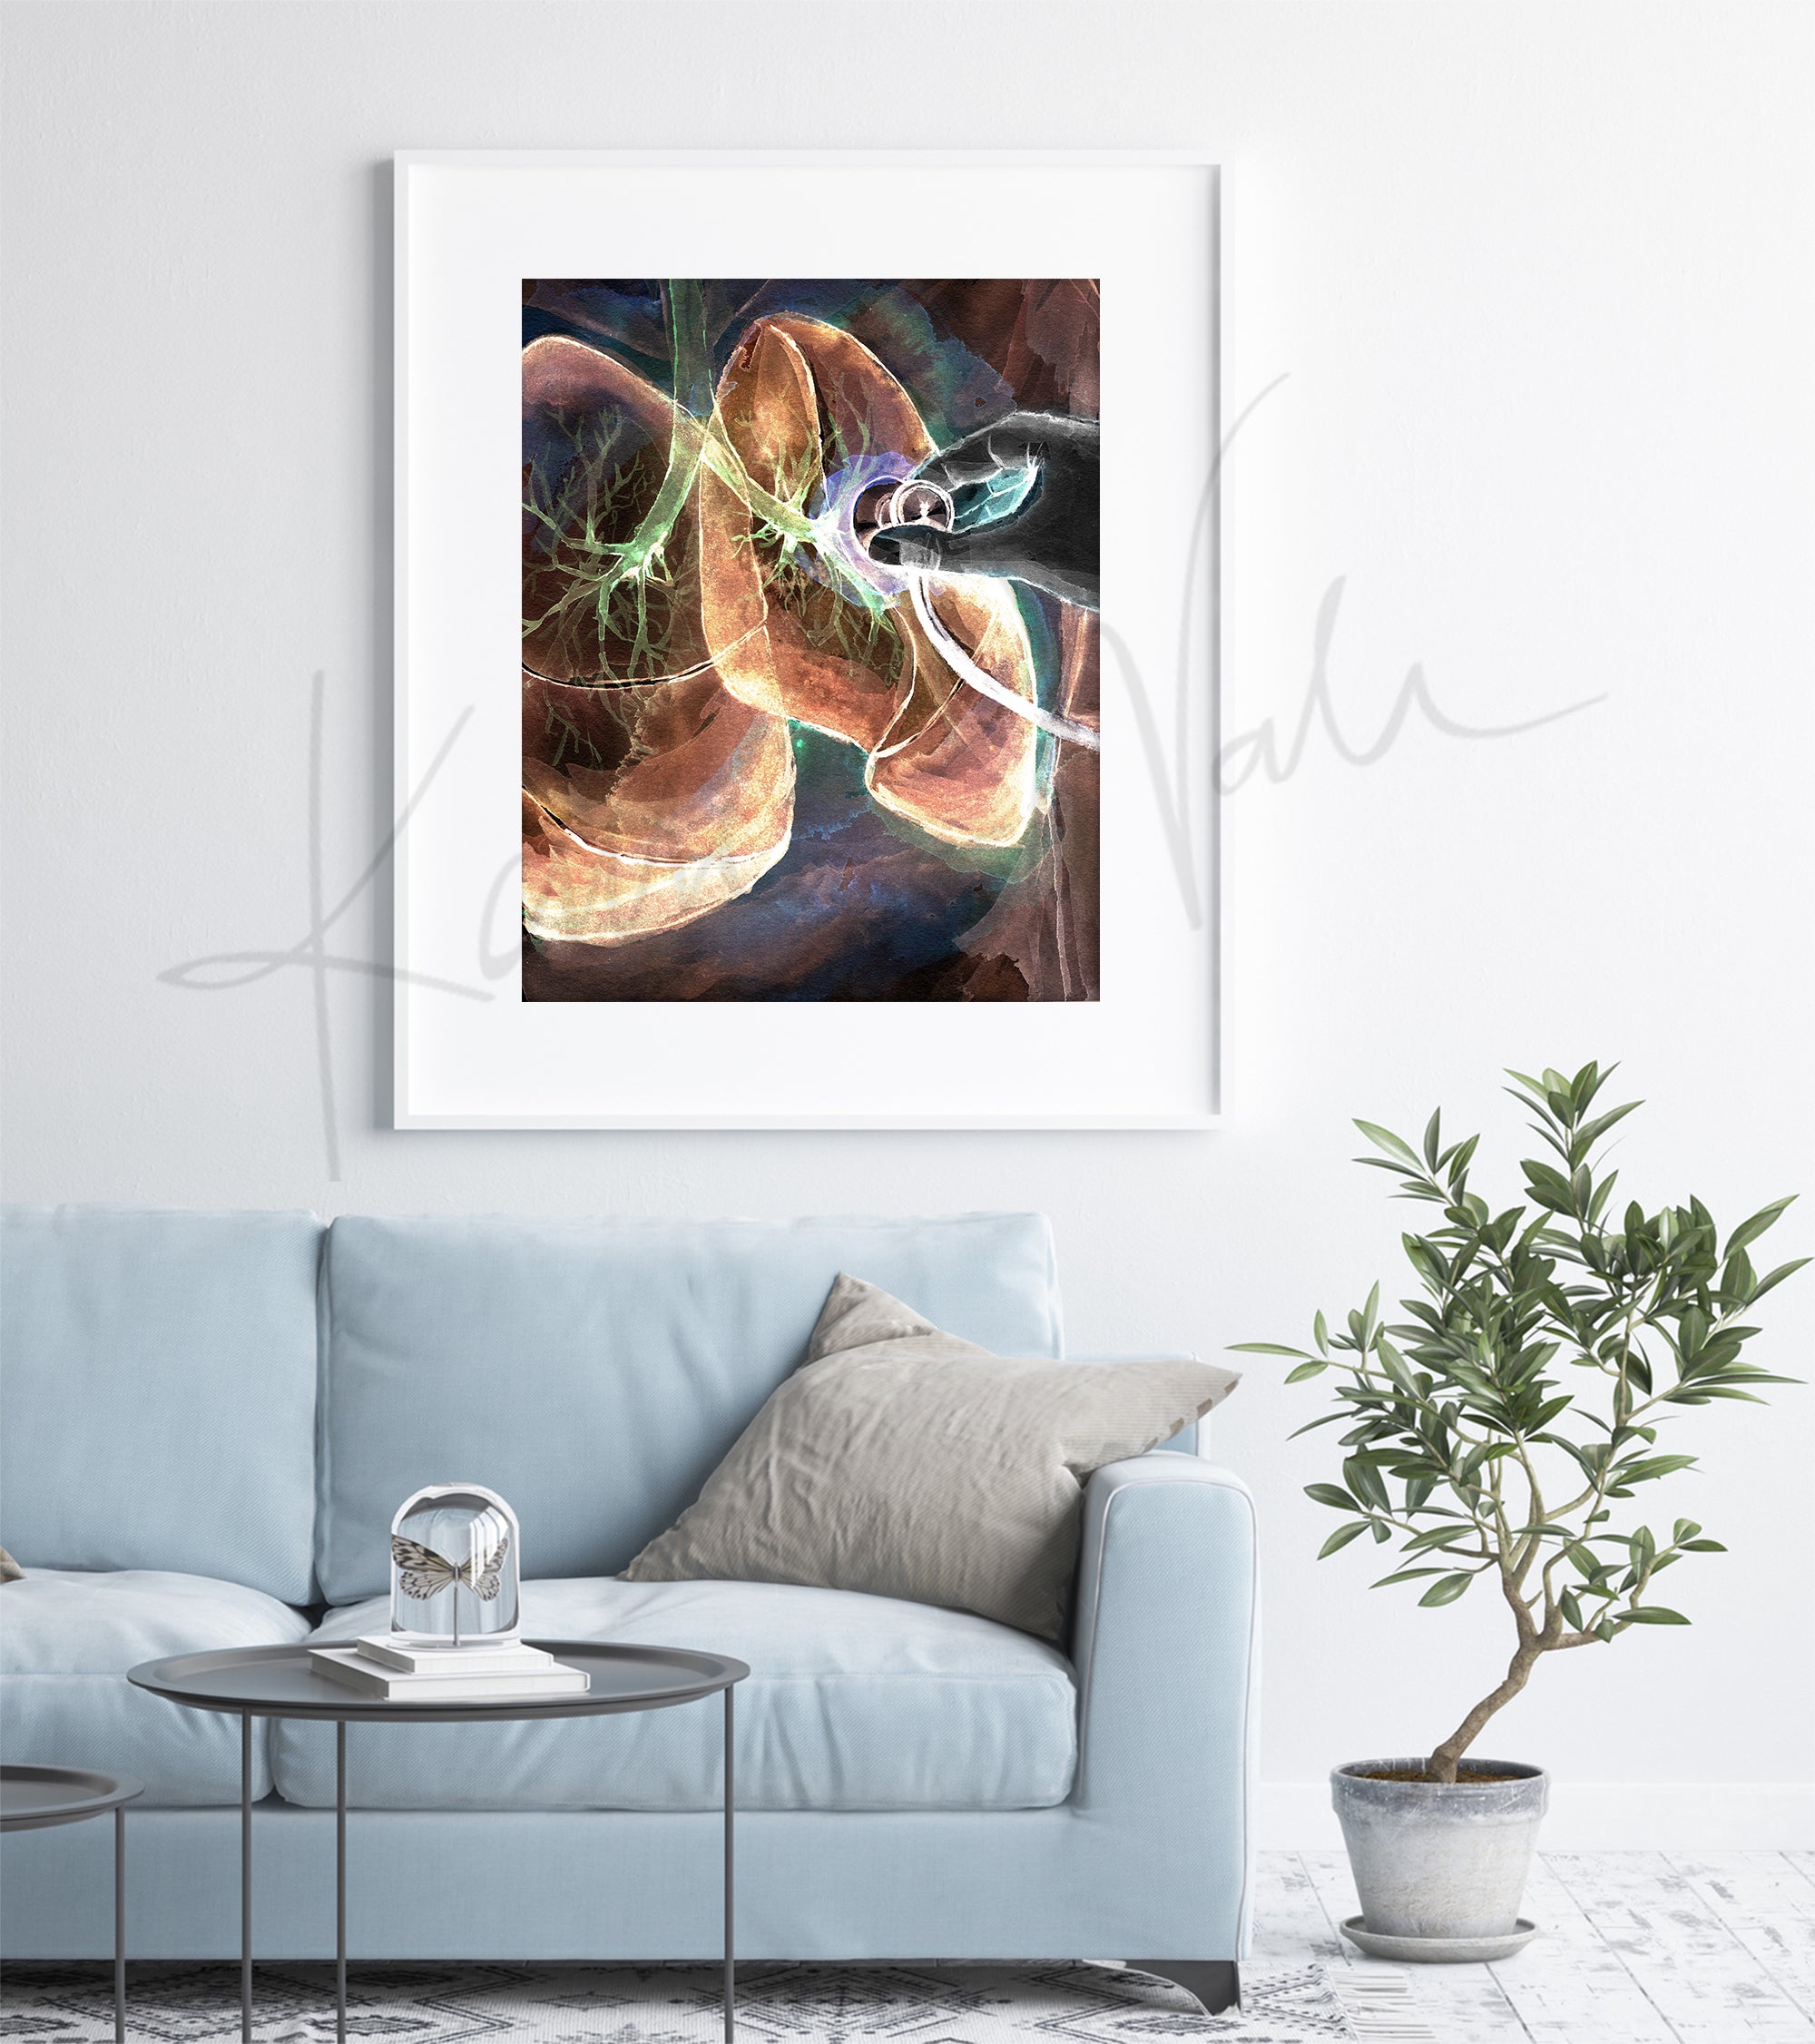 Framed watercolor painting of lung auscultation in orange, black, green, and purple. The painting hangs over a blue couch.